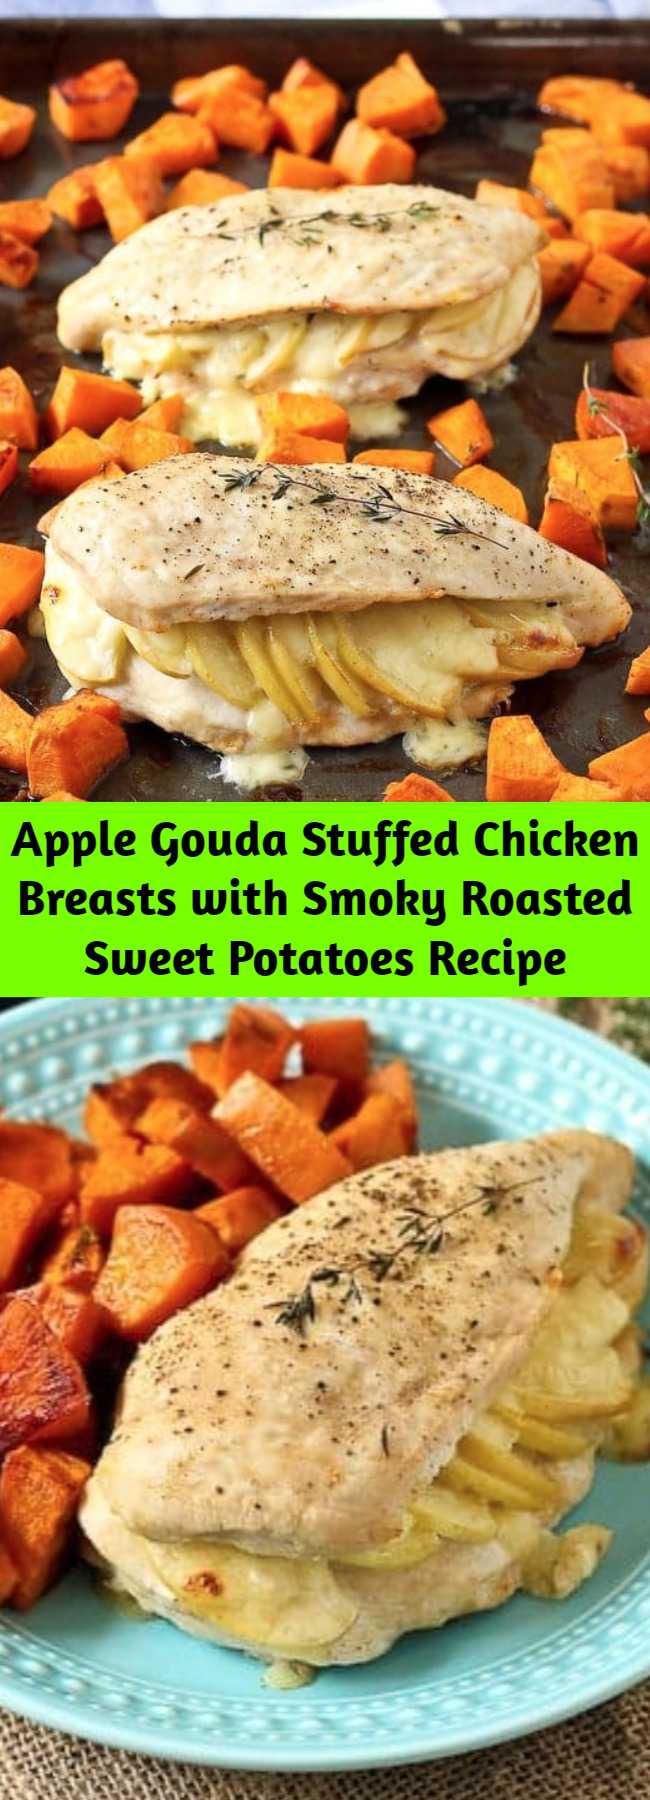 Apple Gouda Stuffed Chicken Breasts with Smoky Roasted Sweet Potatoes Recipe - Creamy Gouda cheese and sweet apples make these stuffed chicken breasts a winner! Pair with smoky roasted sweet potatoes for a sheet pan supper that will make everyone happy.